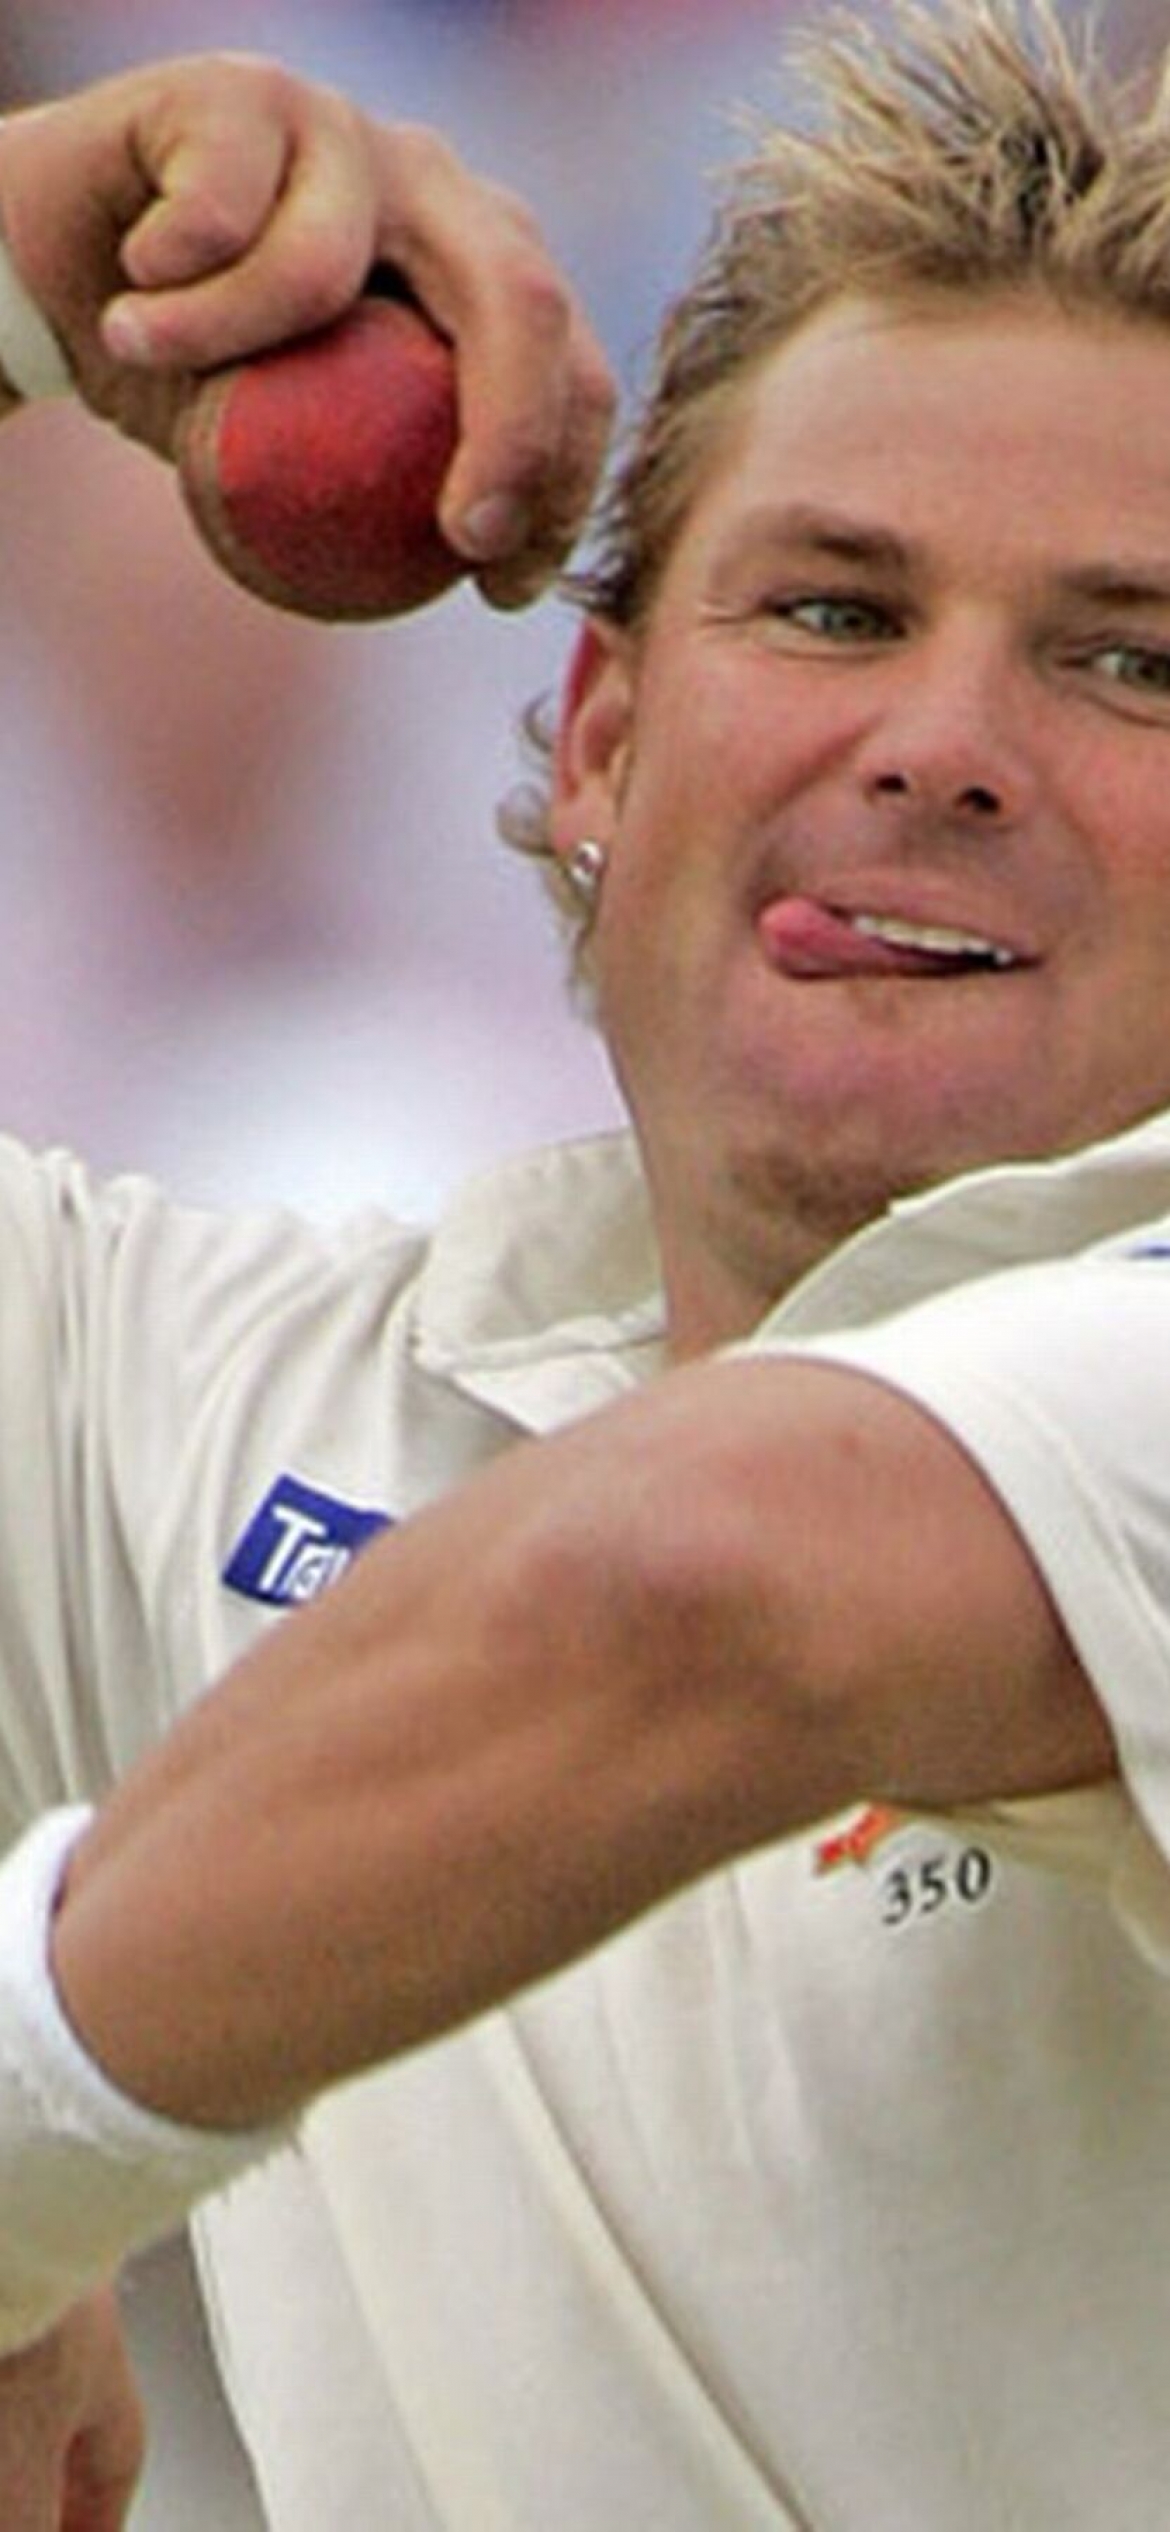 Download Shane Warne Bowling Action Wallpapers Wallpaper 